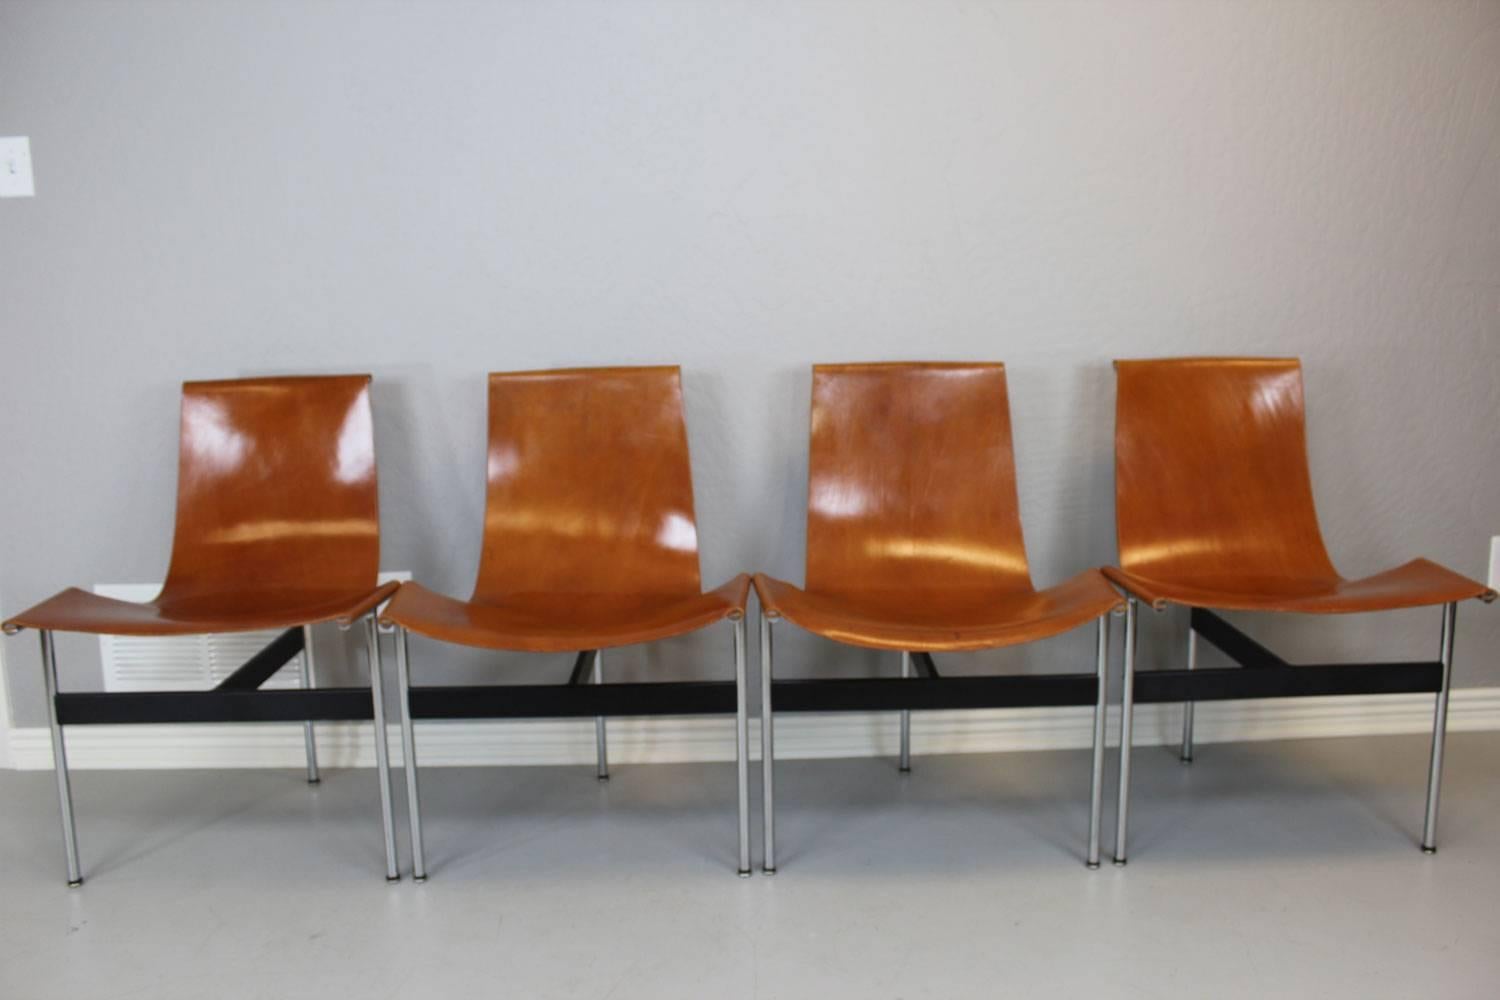 Set of four original William Katavolos leather sling T-Chairs manufactured by Laverne International. Spectacular vintage patina each chair.